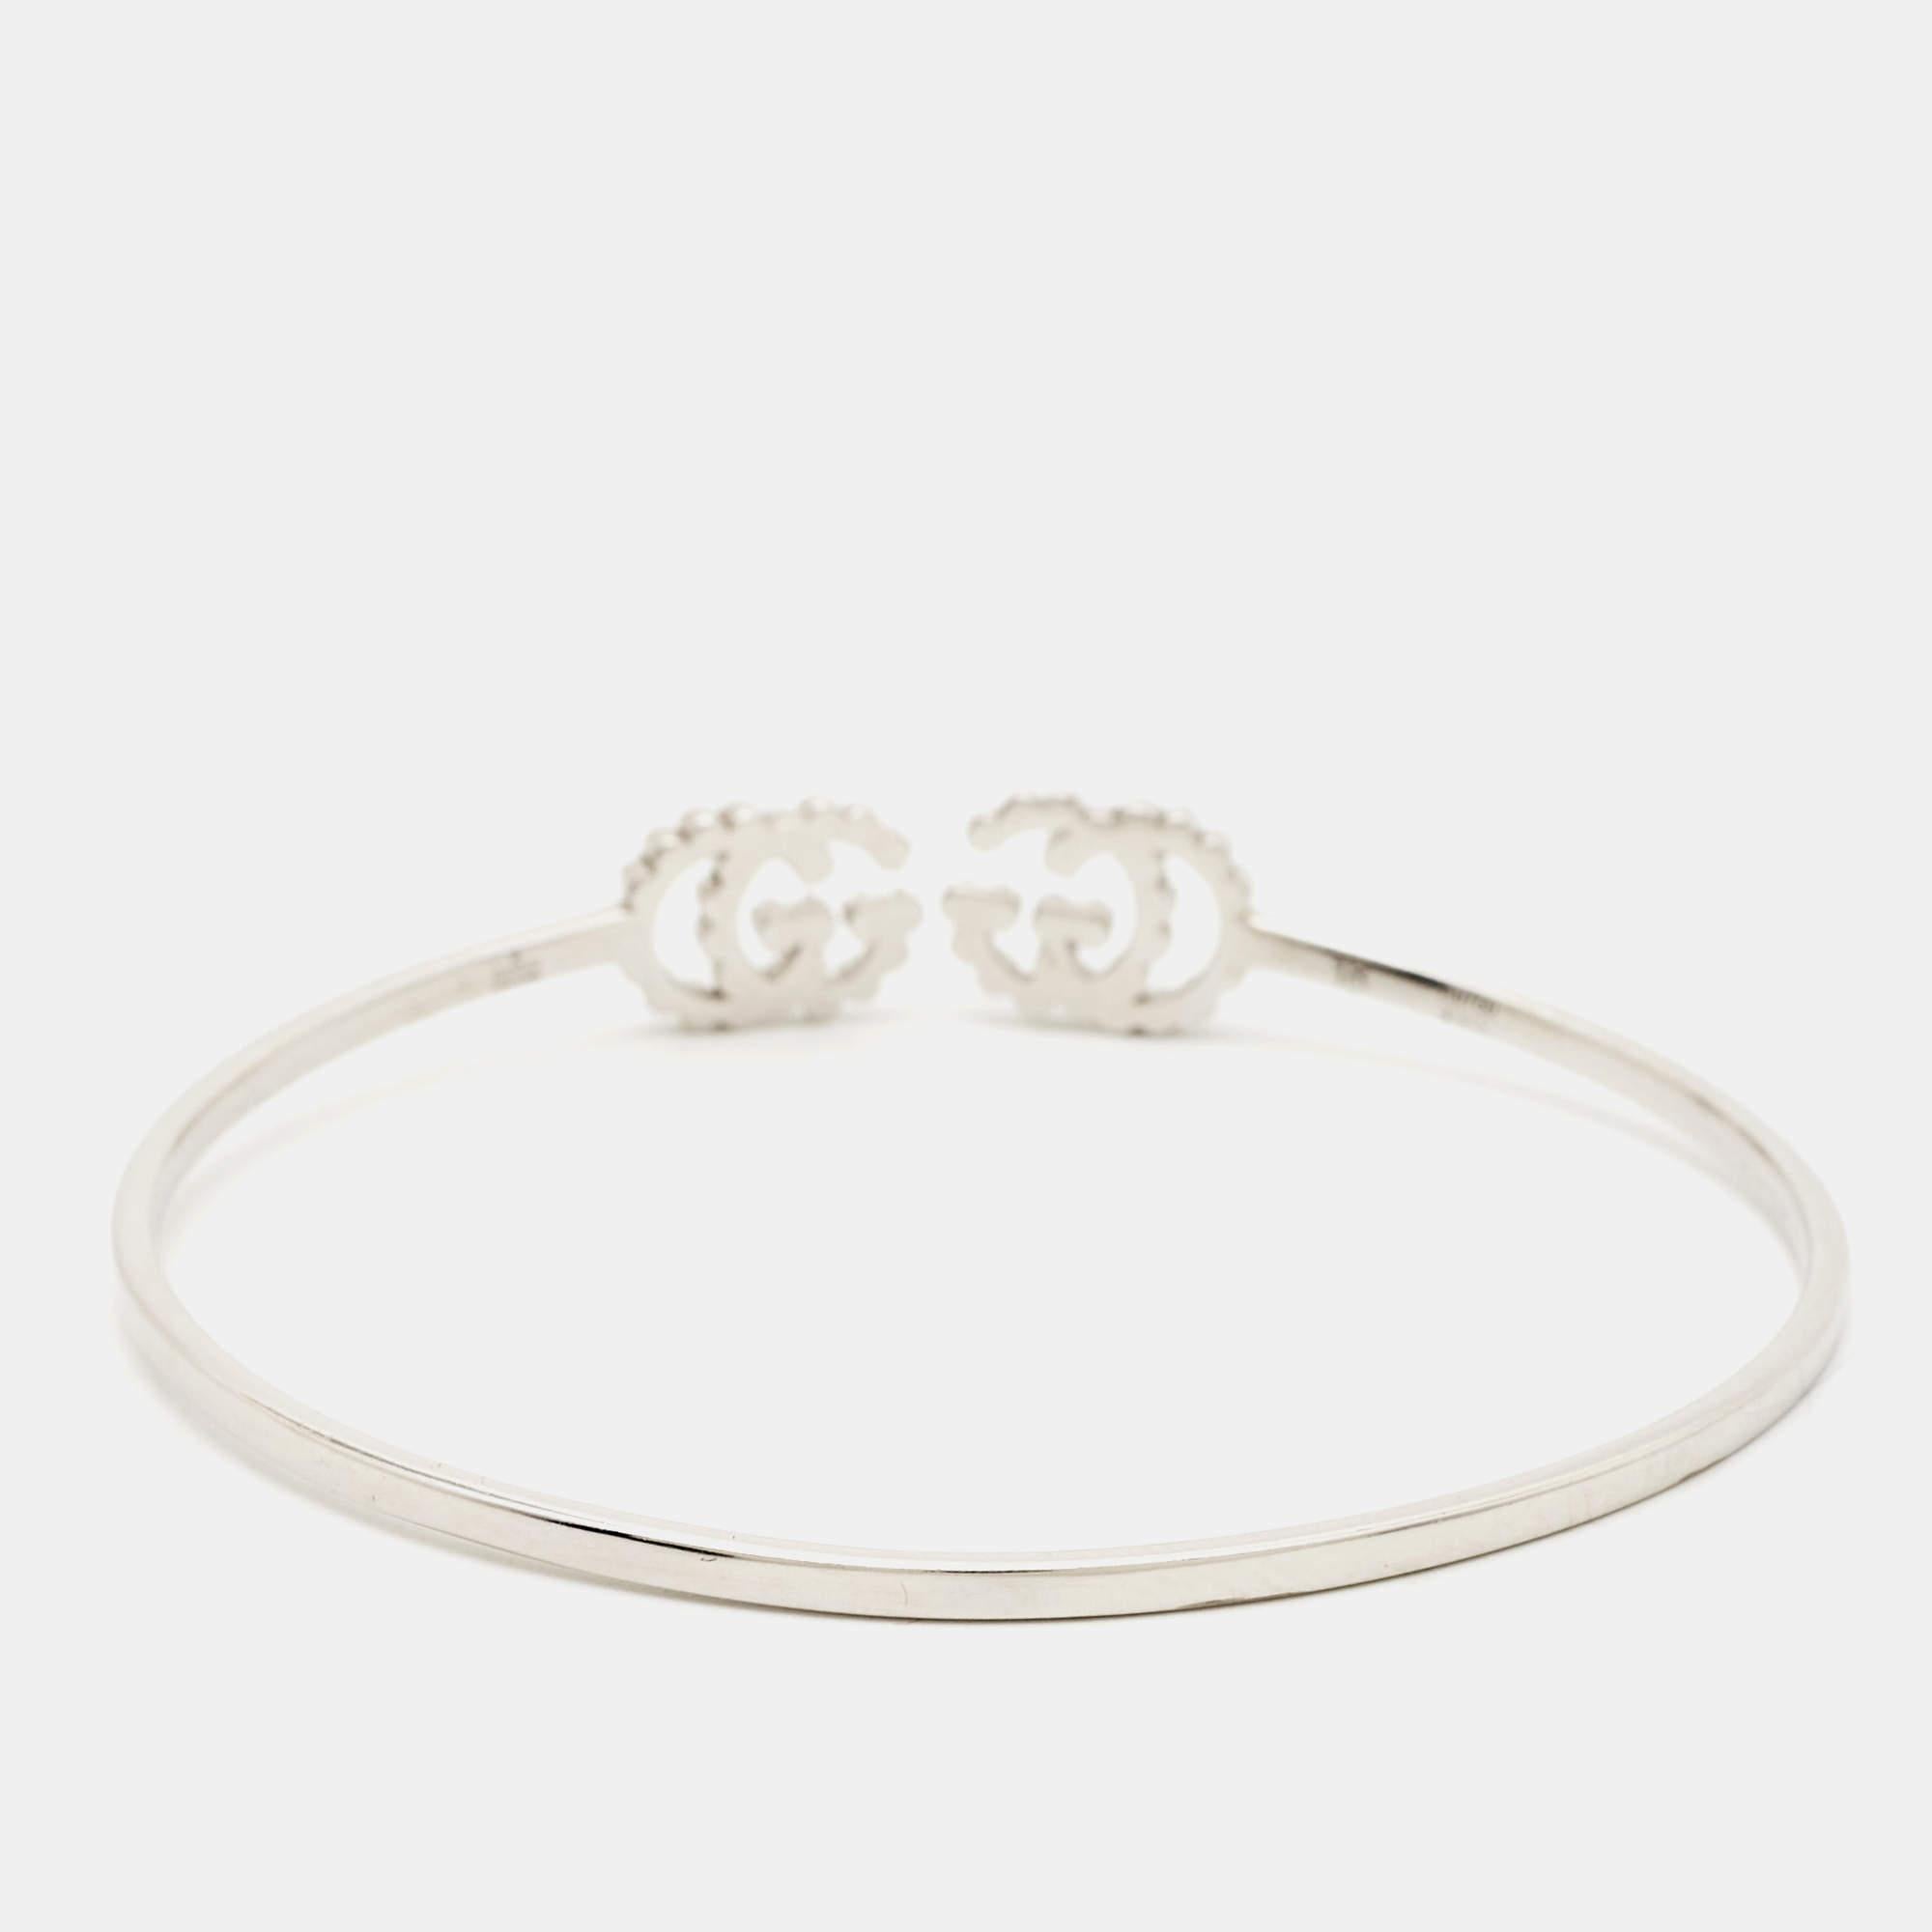 To form this GG Running bracelet, Gucci brings to light the Double G motif—a much-loved code inspired by a House design dating back to the '70s-a hallmark era. Sculpted using 18k white gold, the open cuff bracelet has a thin, wire-like band